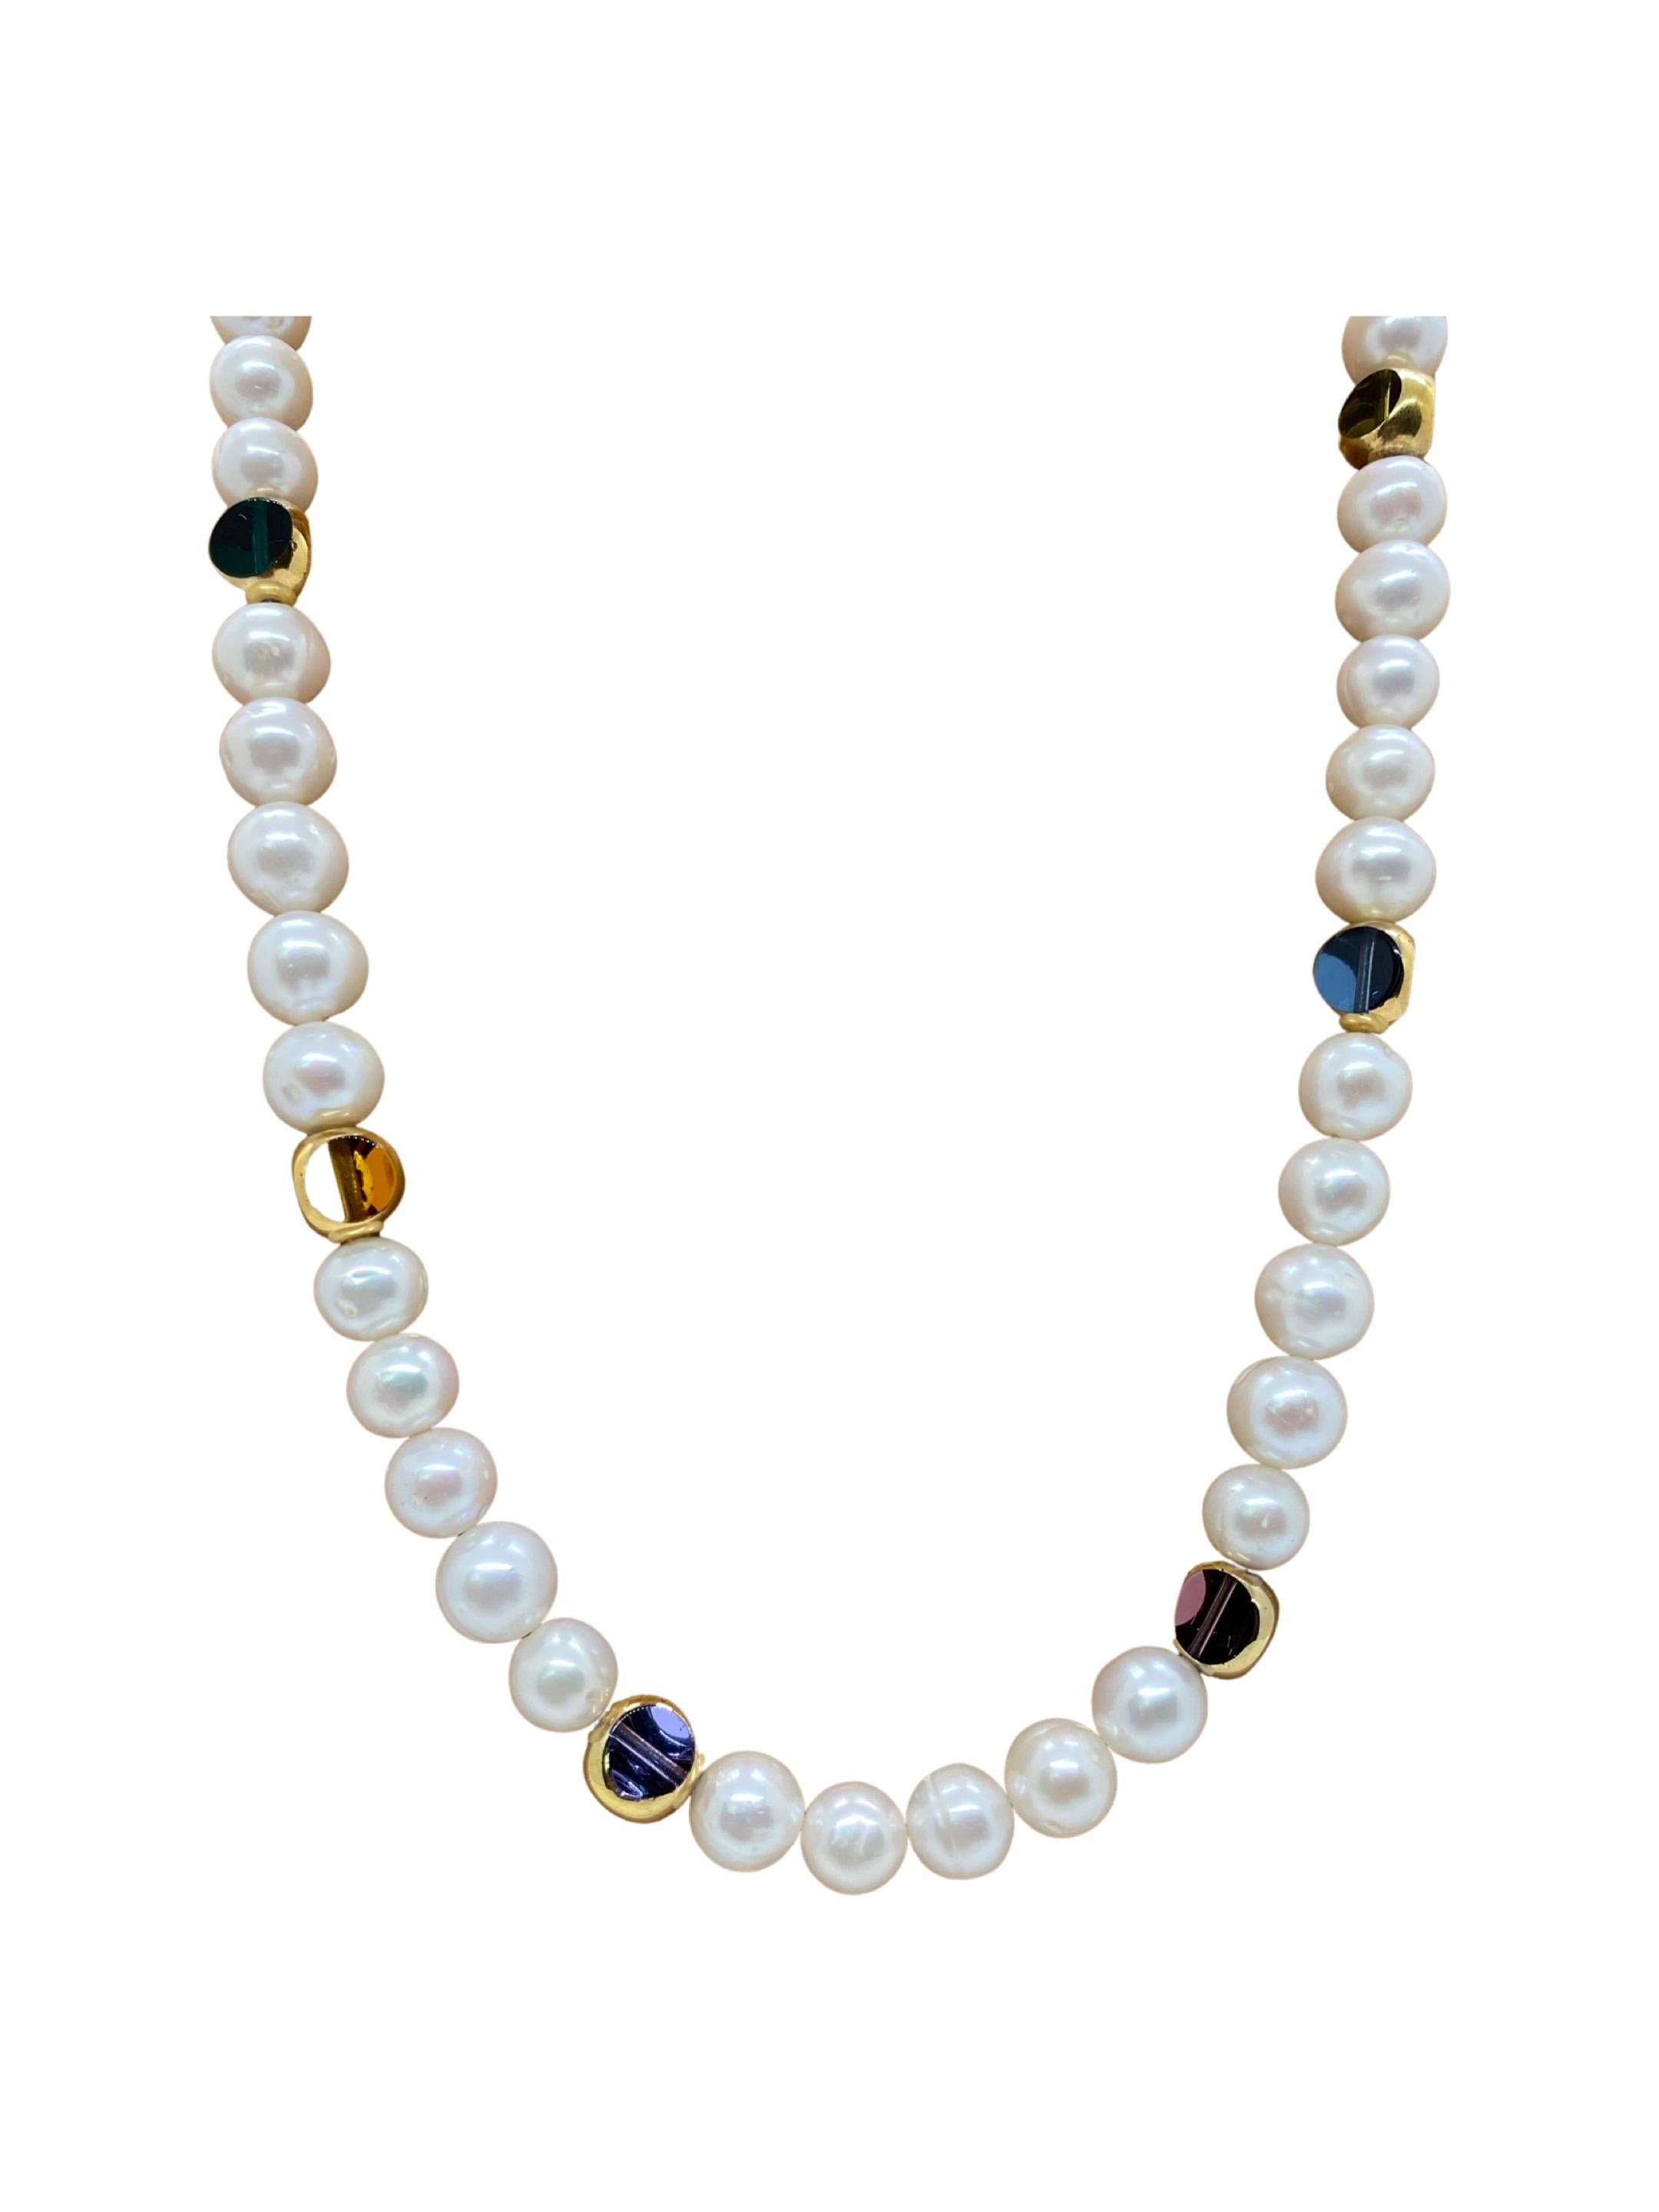 Inspired by the Glam of the 1920s. This necklace is made of German Vintage Glass Beads that are edged with 24K gold circa 1920s-1960s. It is incorporated with Freshwater Pearls and 24K gold filled chain and 14K gold filled lobster clasp. It is